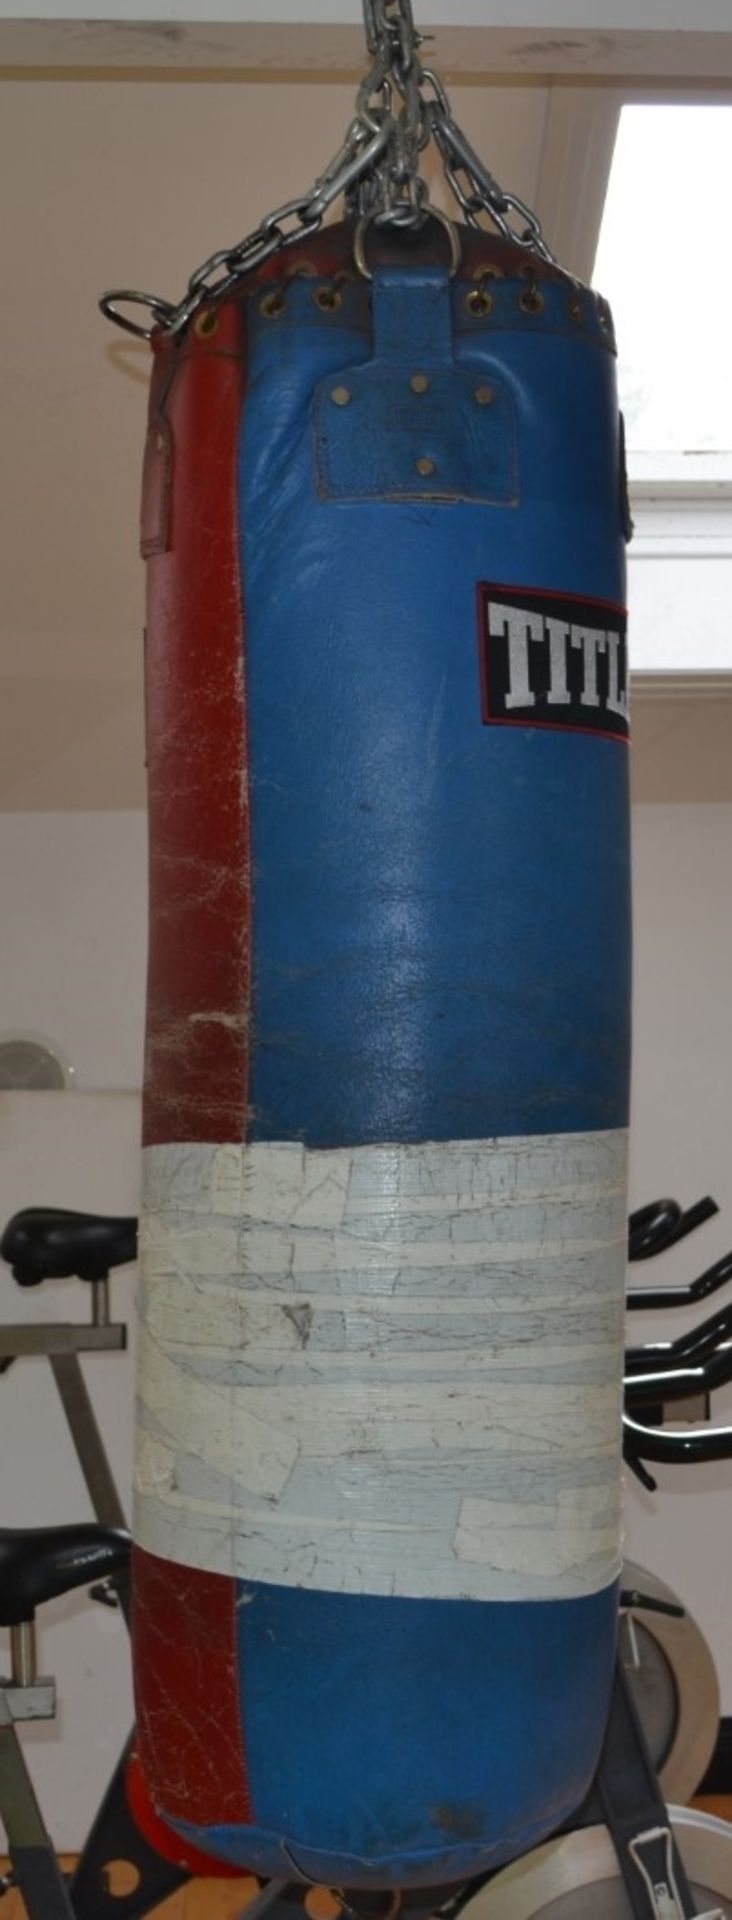 1 x Title Boxing Punch Bag With Wall Bracket and Hanging Chain - Ref: J2008/1FDS - CL356 - Image 3 of 3